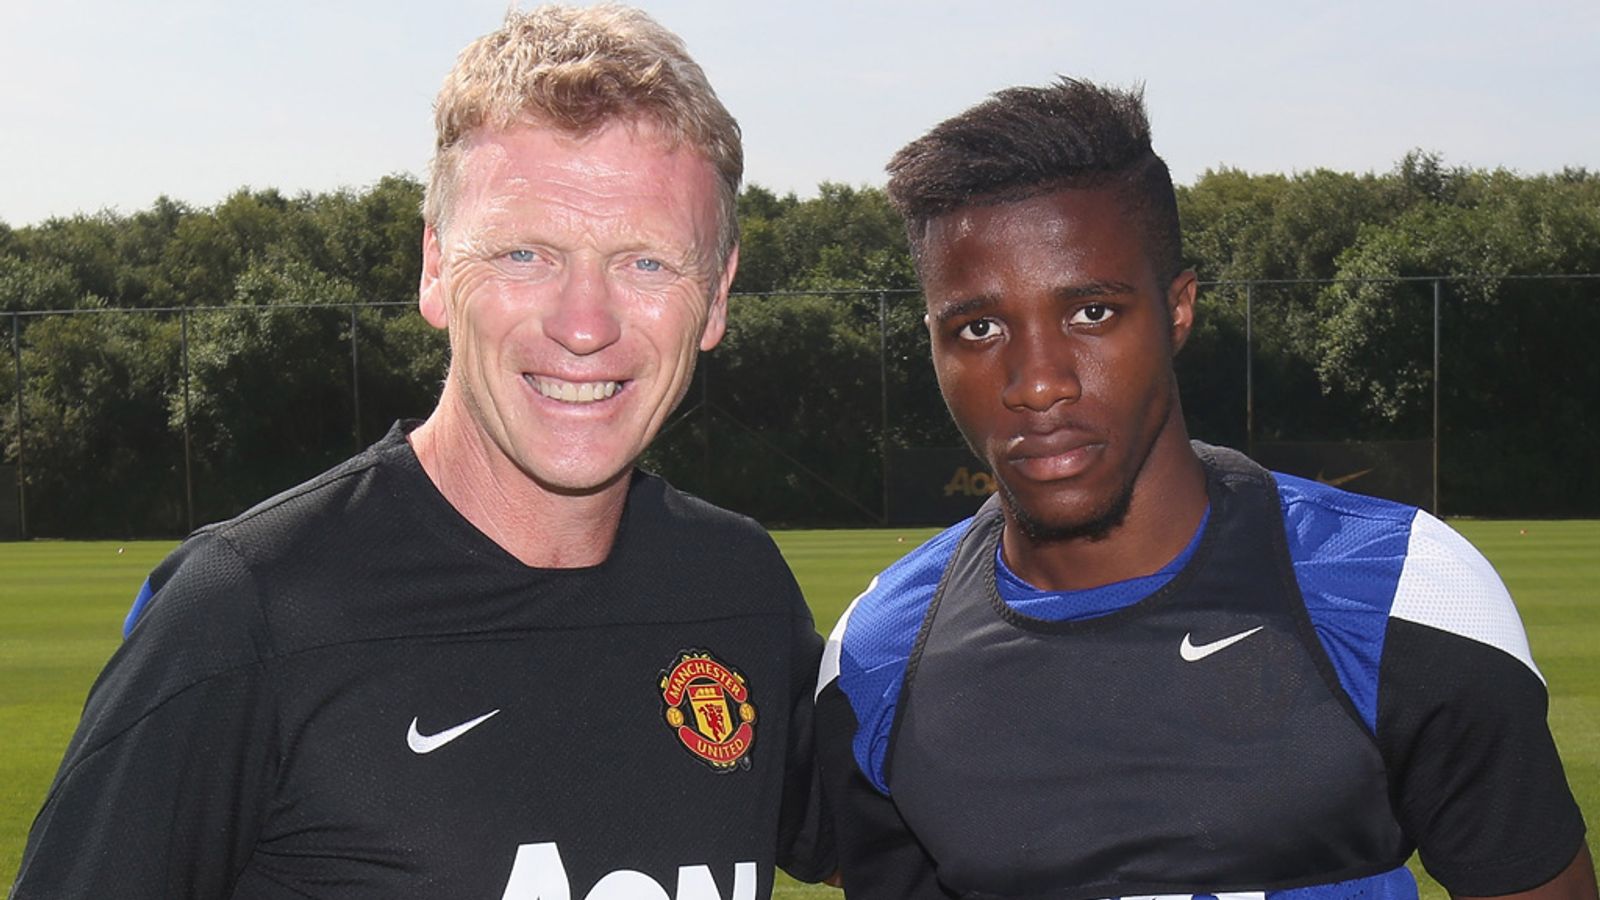 David Moyes includes Wilfried Zaha in Manchester United's pre-season tour squad | Football News | Sky Sports